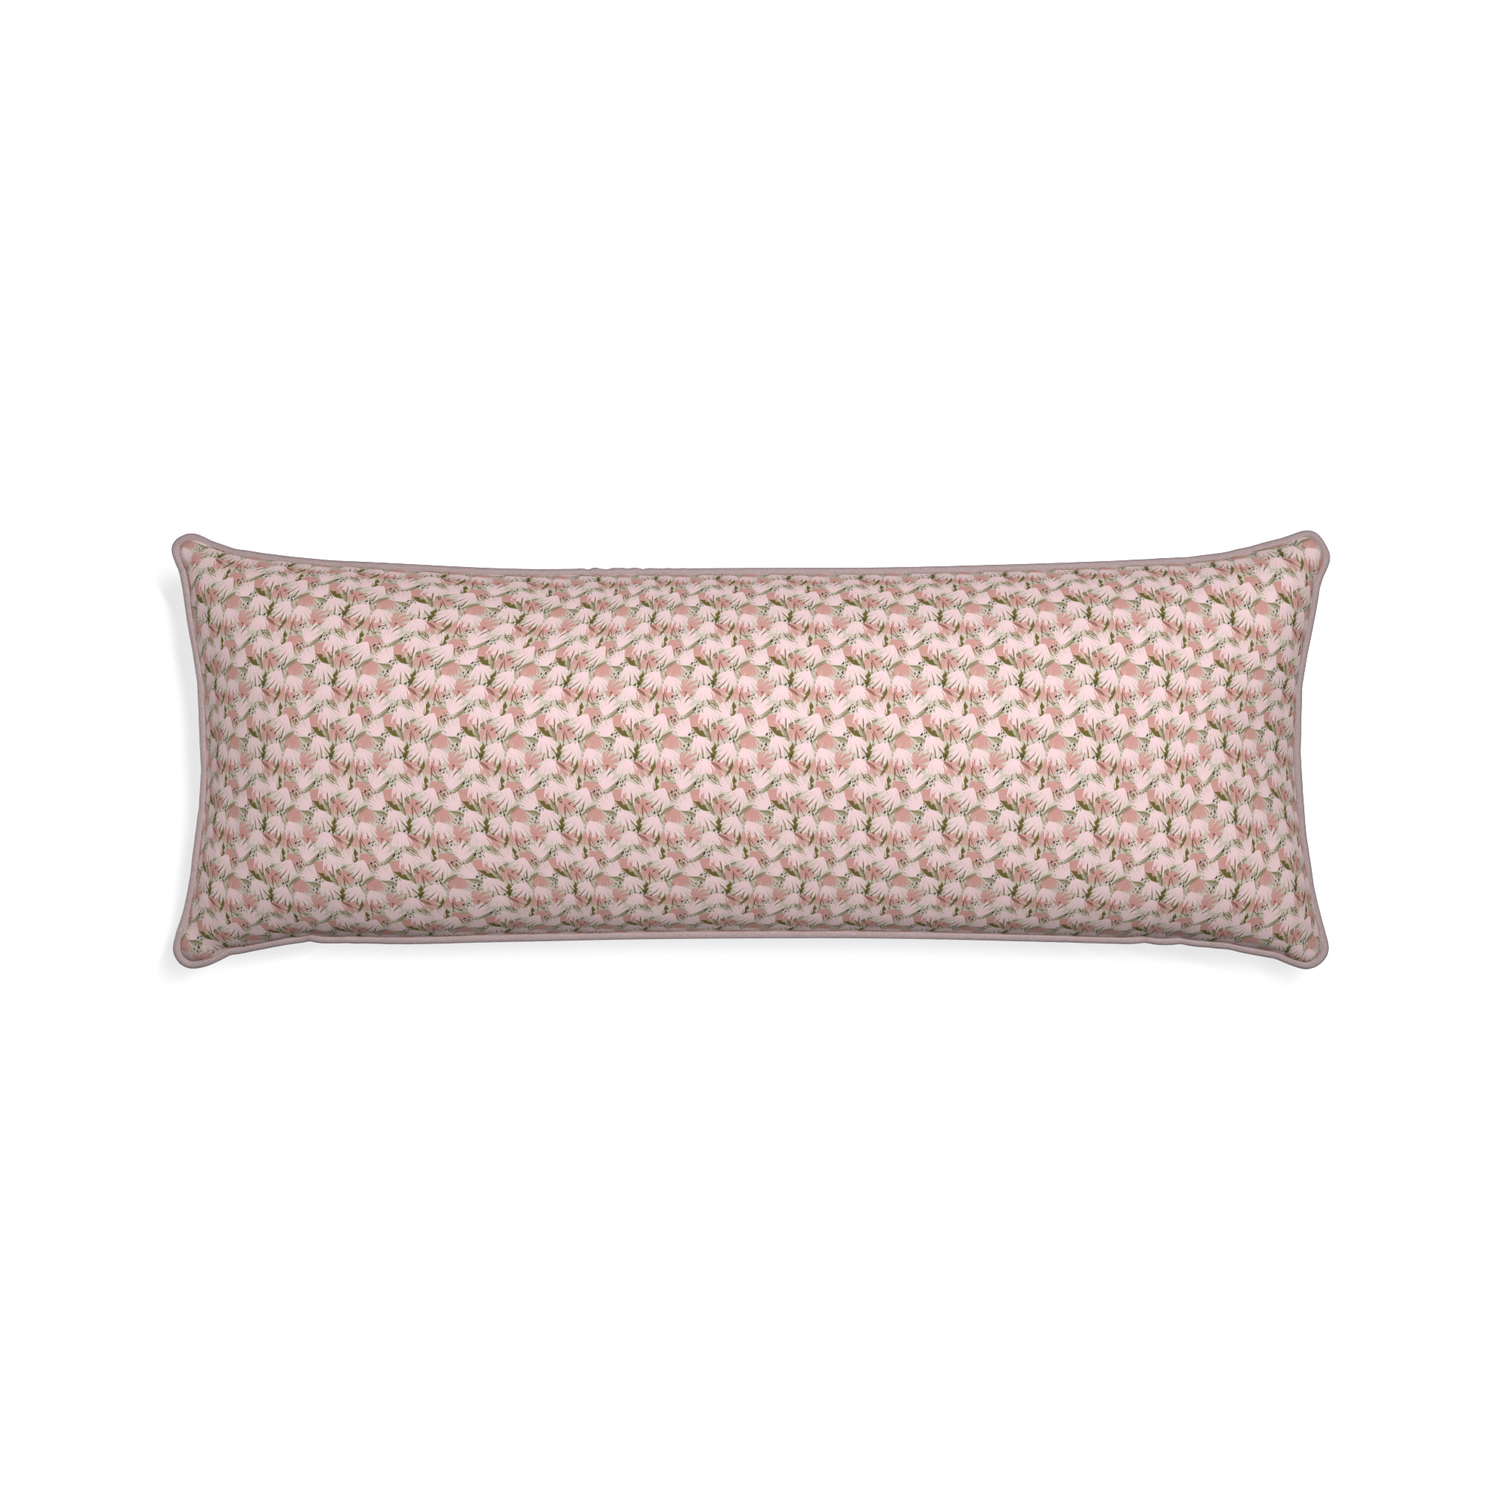 Xl-lumbar eden pink custom pink floralpillow with orchid piping on white background